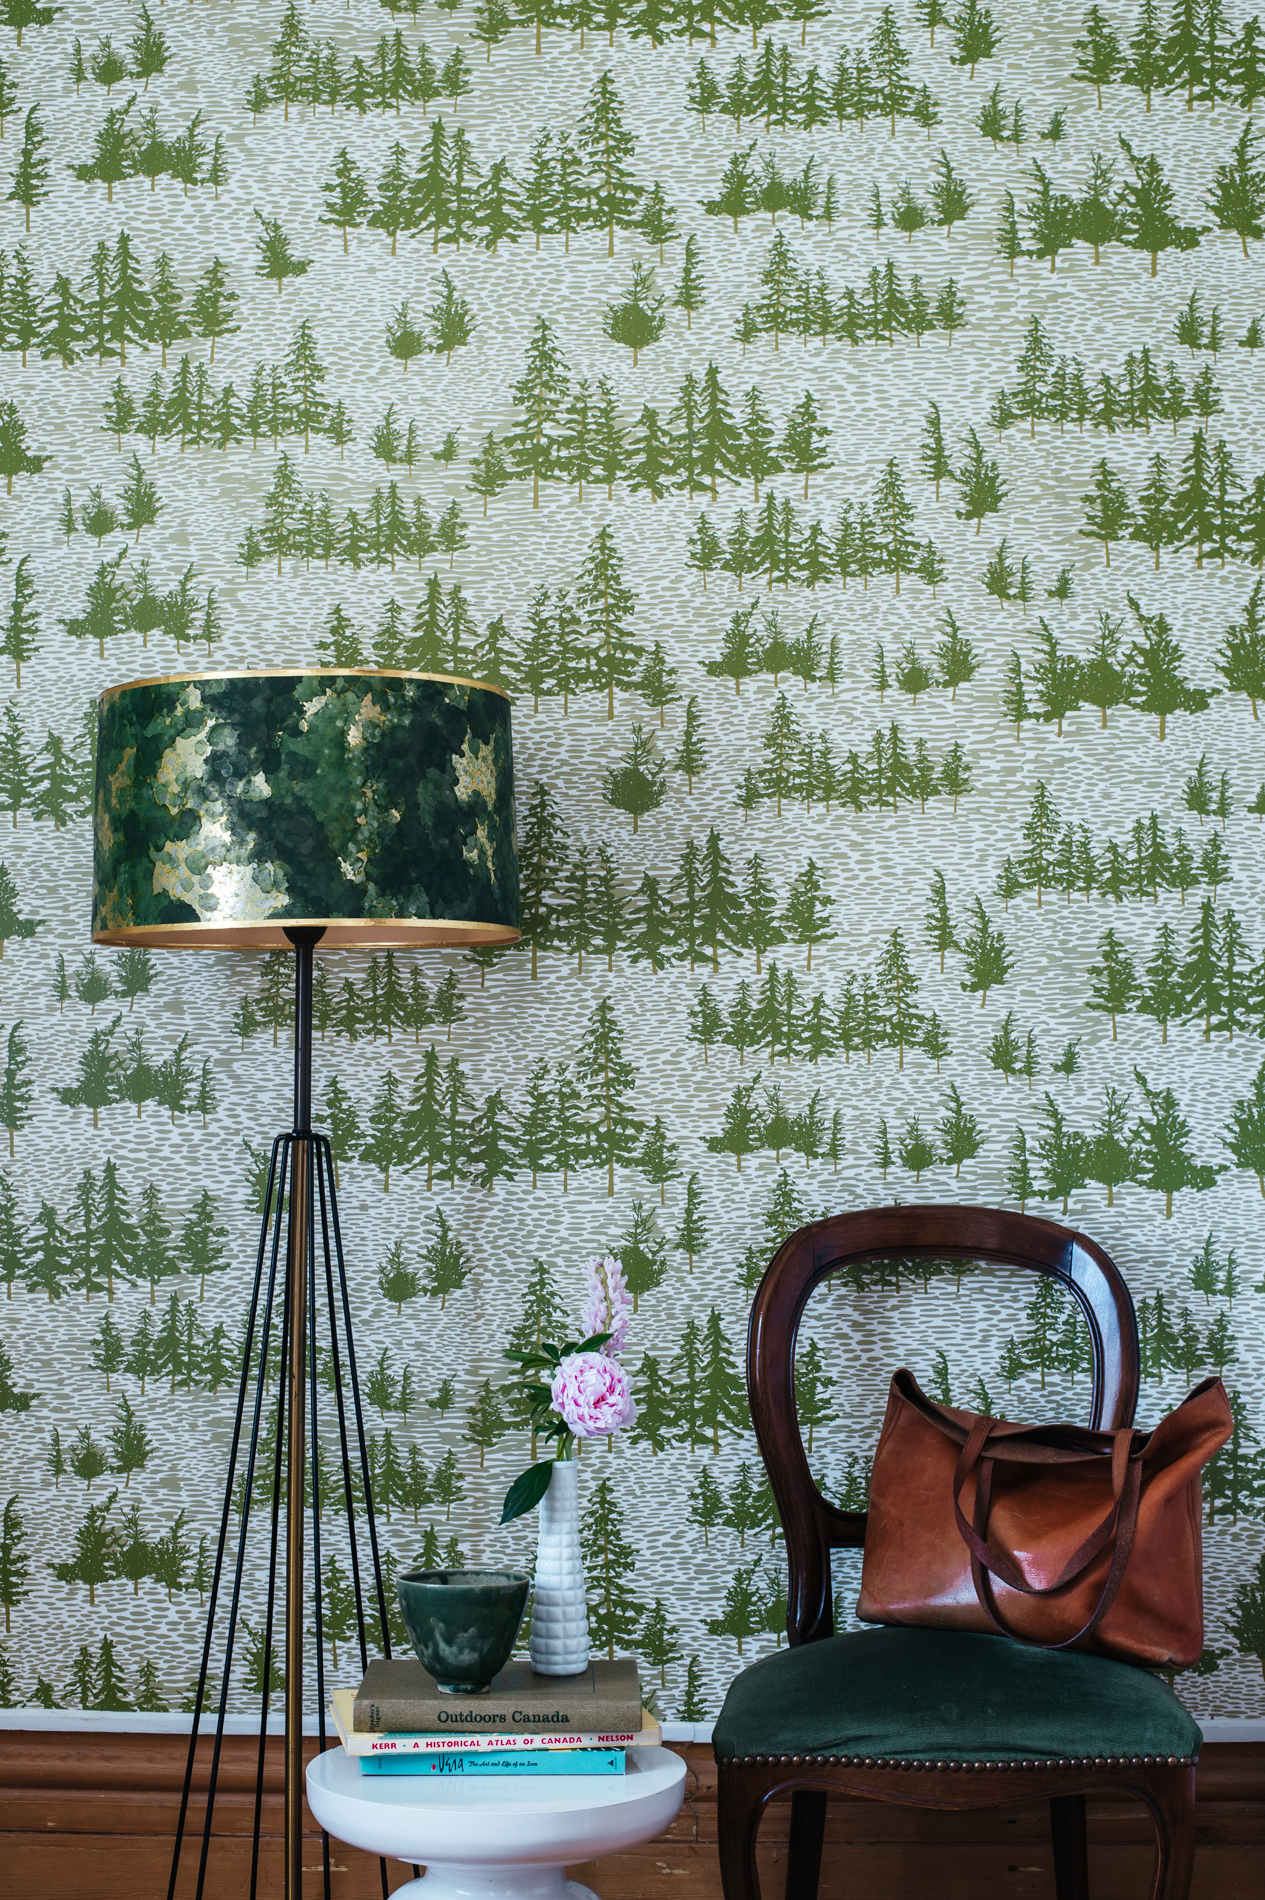 Kate Golding Chuckery Hill wallpaper // Modern wallcoverings and interior decor.